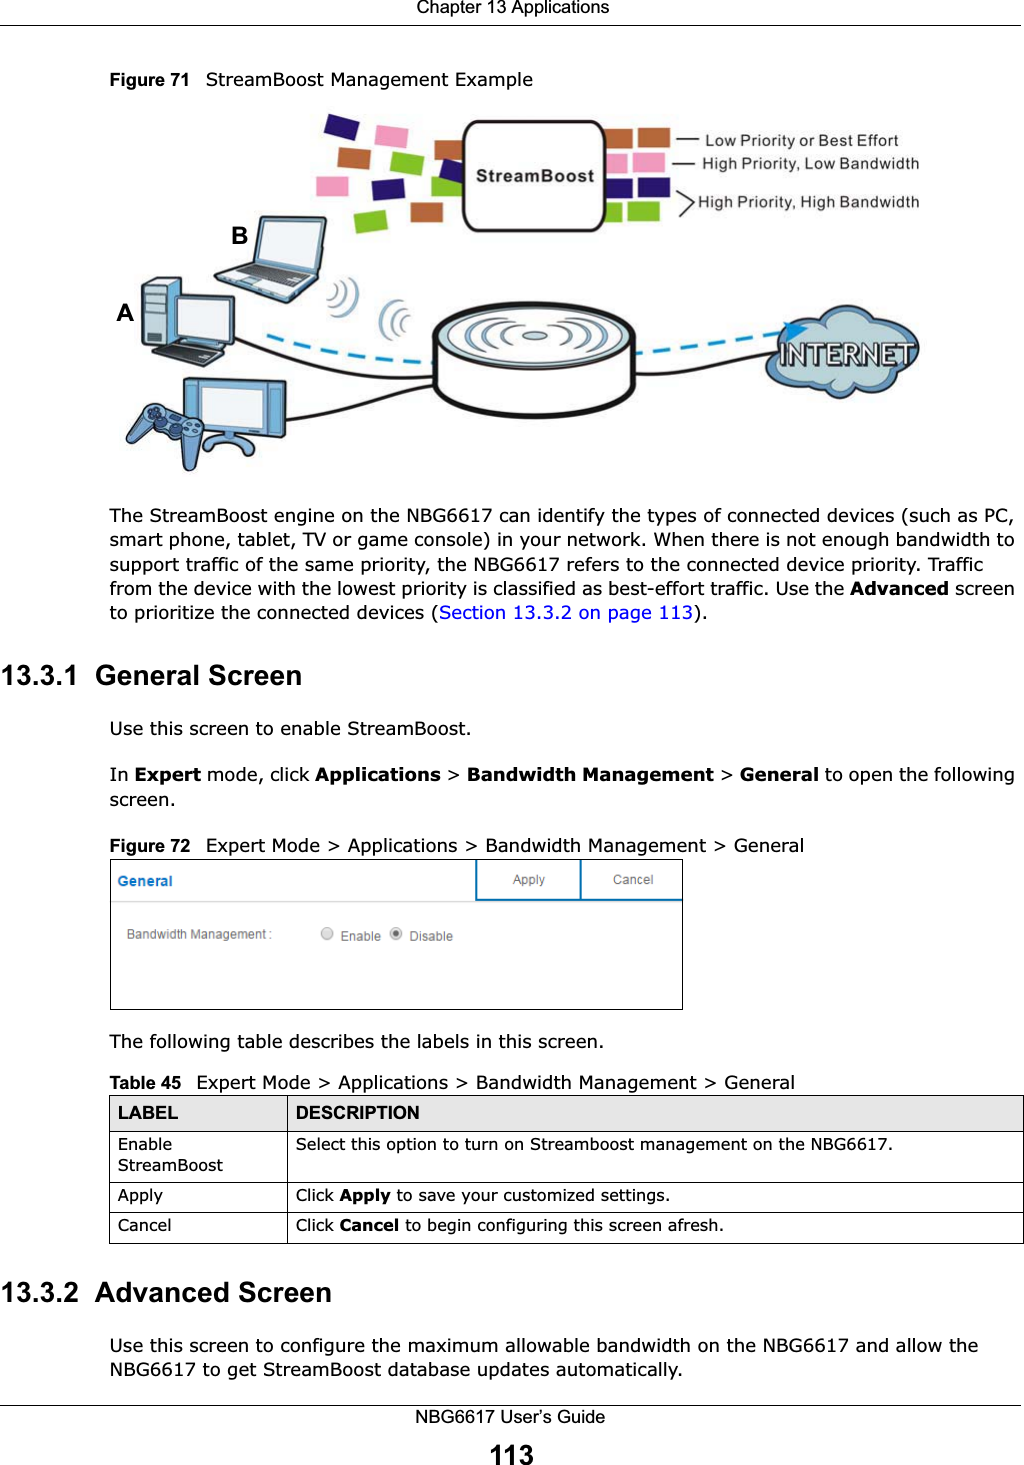  Chapter 13 ApplicationsNBG6617 User’s Guide113Figure 71   StreamBoost Management ExampleThe StreamBoost engine on the NBG6617 can identify the types of connected devices (such as PC, smart phone, tablet, TV or game console) in your network. When there is not enough bandwidth to support traffic of the same priority, the NBG6617 refers to the connected device priority. Traffic from the device with the lowest priority is classified as best-effort traffic. Use the Advanced screen to prioritize the connected devices (Section 13.3.2 on page 113).13.3.1  General ScreenUse this screen to enable StreamBoost.In Expert mode, click Applications &gt; Bandwidth Management &gt; General to open the following screen.Figure 72   Expert Mode &gt; Applications &gt; Bandwidth Management &gt; General The following table describes the labels in this screen.13.3.2  Advanced ScreenUse this screen to configure the maximum allowable bandwidth on the NBG6617 and allow the NBG6617 to get StreamBoost database updates automatically.ABTable 45   Expert Mode &gt; Applications &gt; Bandwidth Management &gt; GeneralLABEL DESCRIPTIONEnable StreamBoostSelect this option to turn on Streamboost management on the NBG6617.Apply Click Apply to save your customized settings.Cancel Click Cancel to begin configuring this screen afresh.